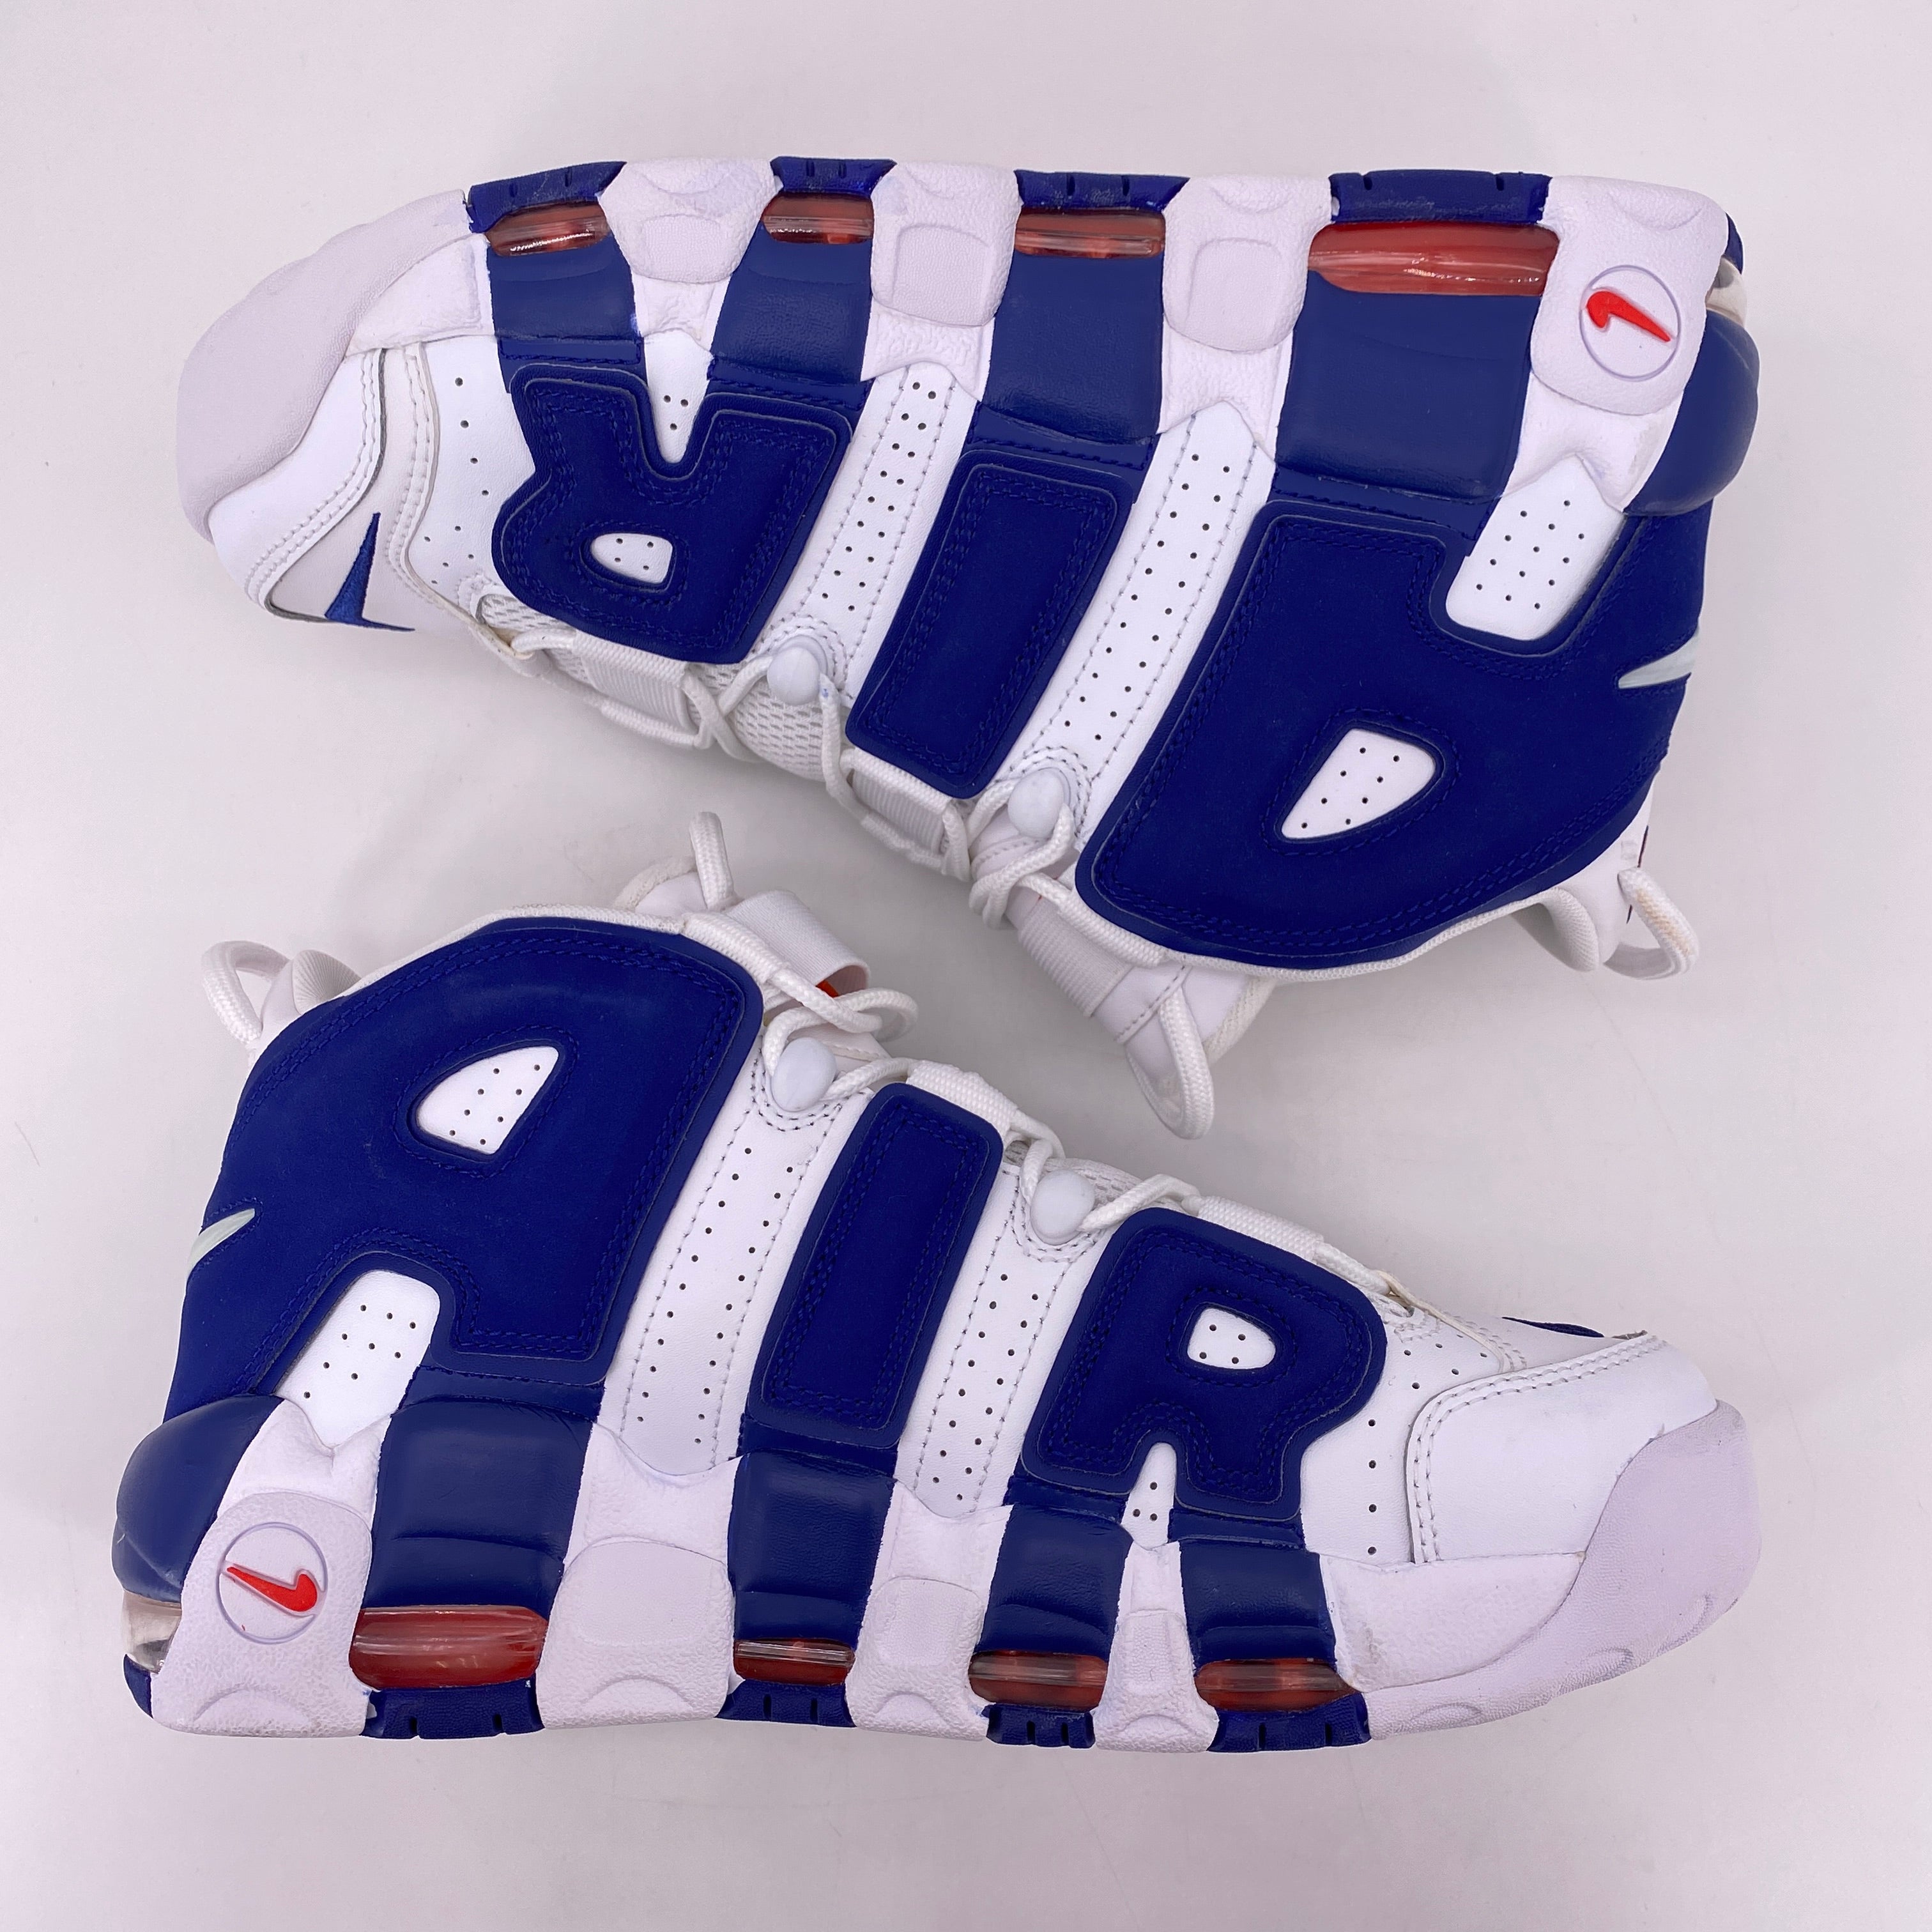 Nike Air More Uptempo "Knicks" 2017 New Size 8.5